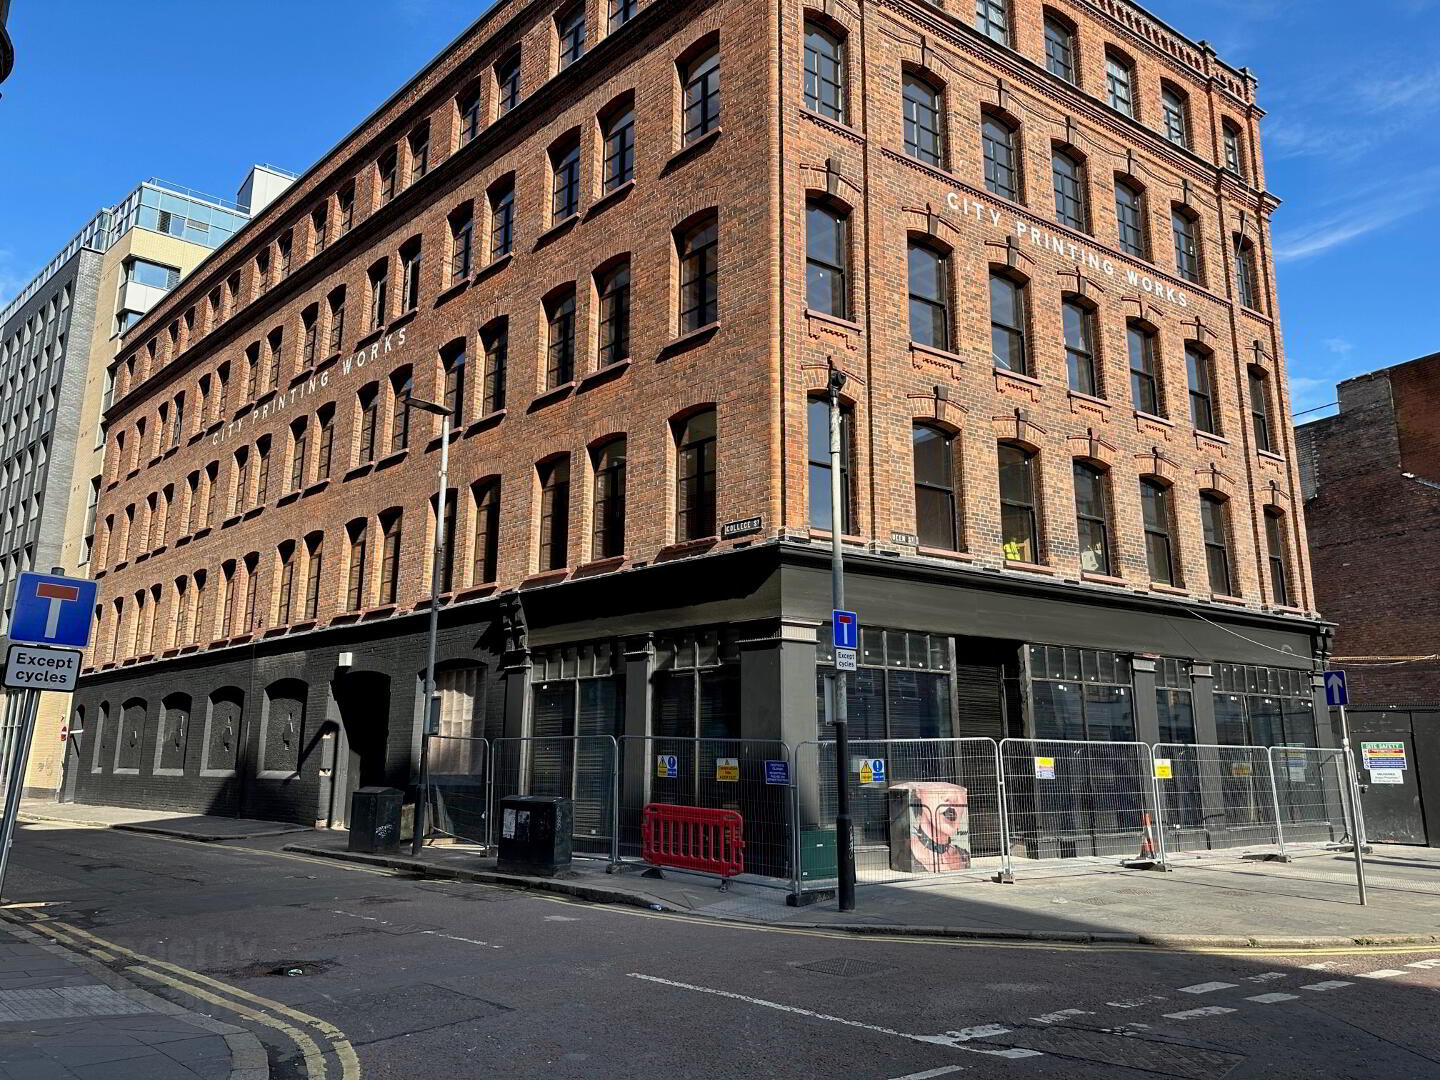 The Printworks, 39 Queen Street